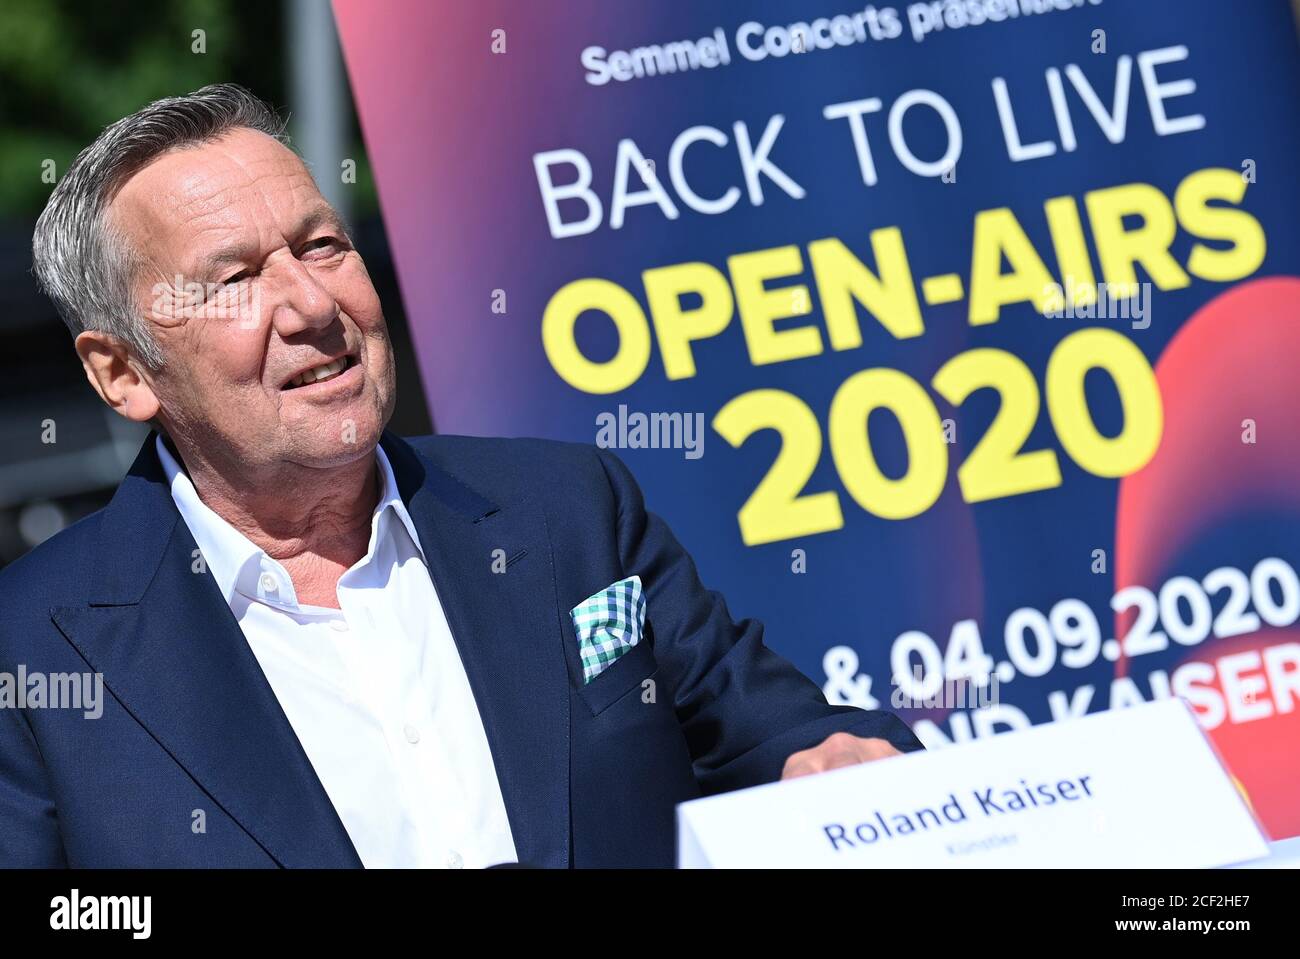 03 September 2020, Berlin: Before the start of the "Back to Live" concert  series, pop singer Roland Kaiser speaks at a press conference at the  Waldbühne. The concert is the start of